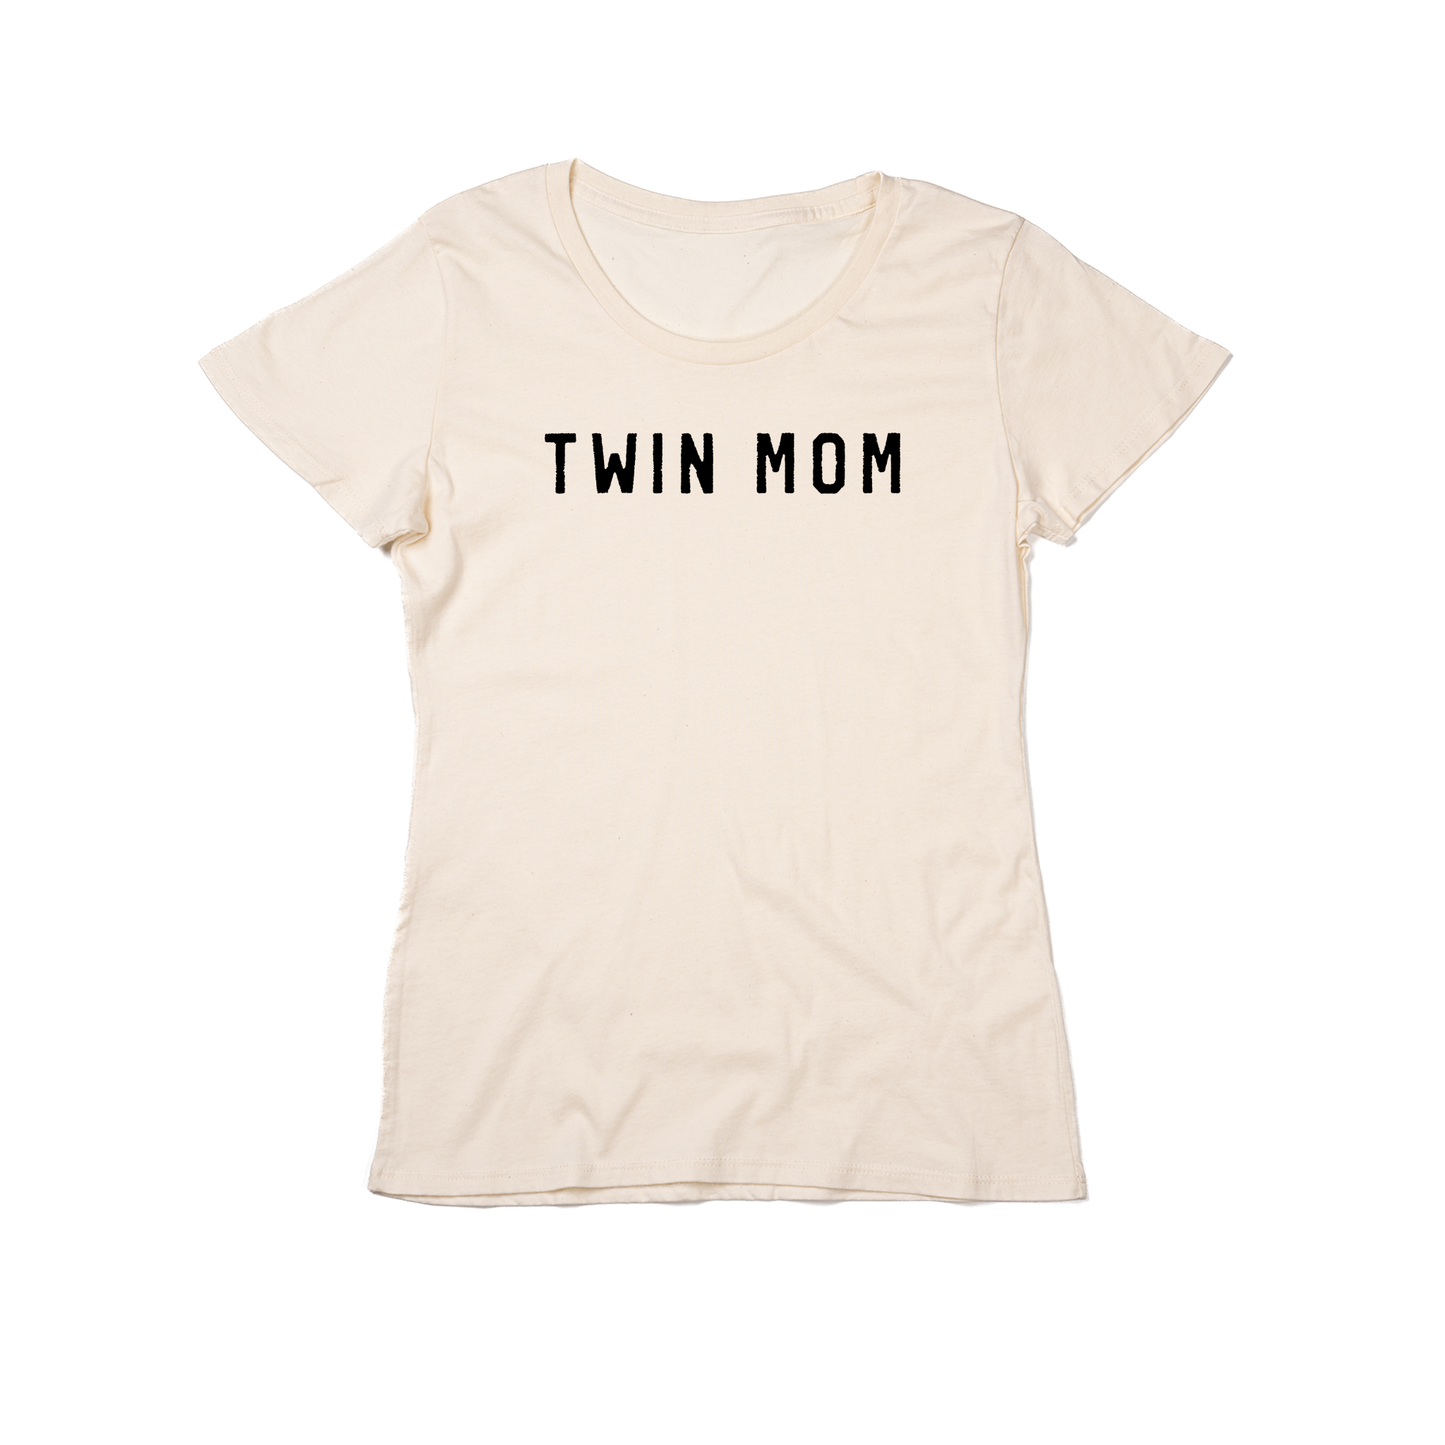 Twin Mom (Black) - Women's Fitted Tee (Natural)